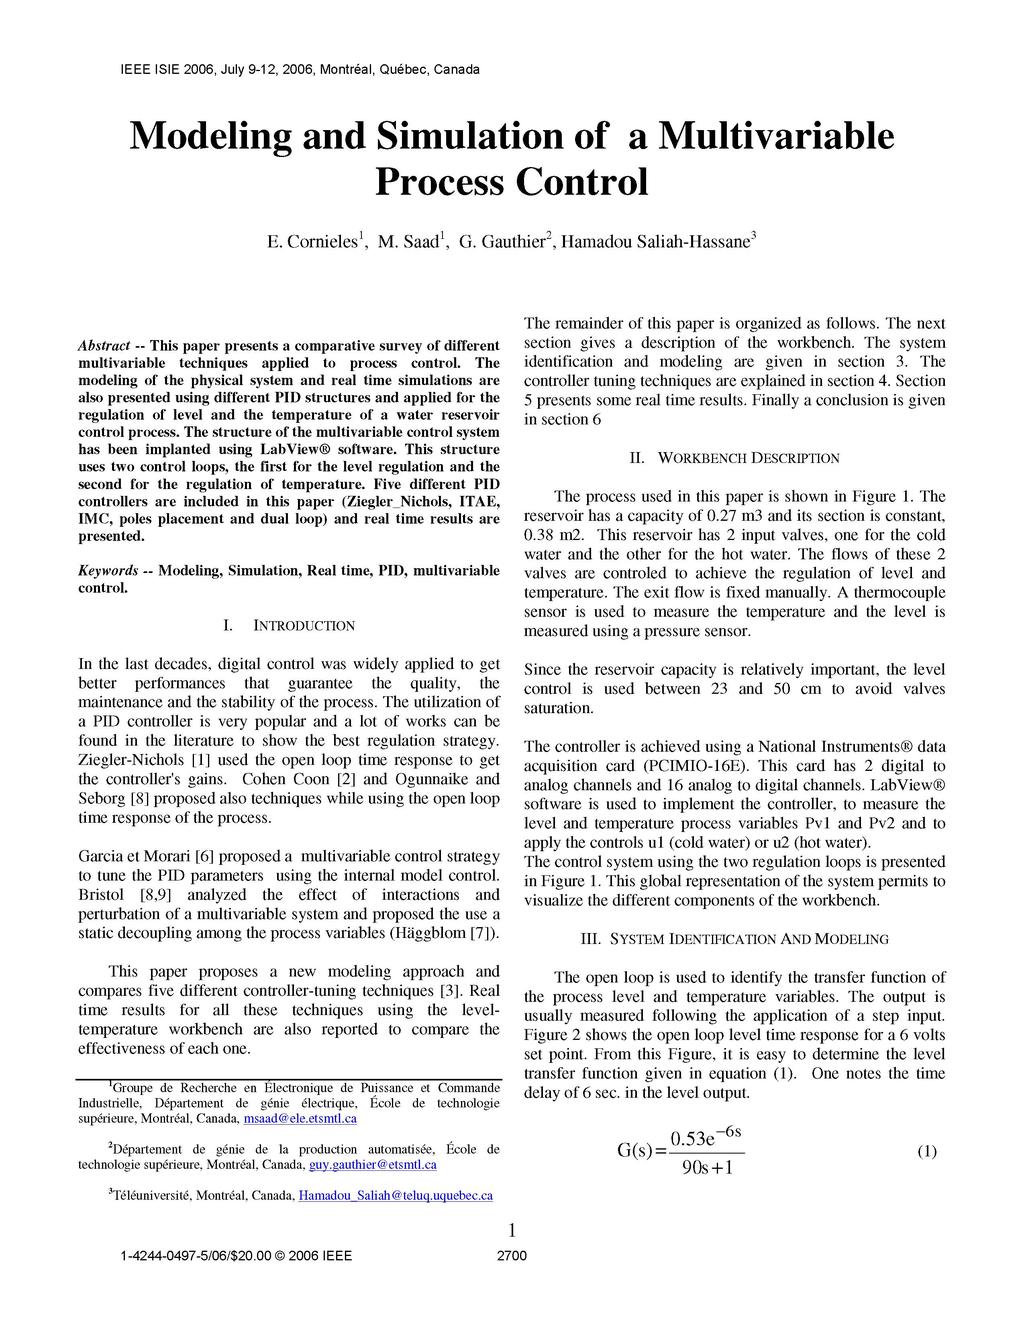 IEEE ISIE 2006, July 9-12, 2006, Montreal, Quebec, Canada Modeling and Simulation of a Multivariable Process Control E. Cornieles1, M. Saad1, G.